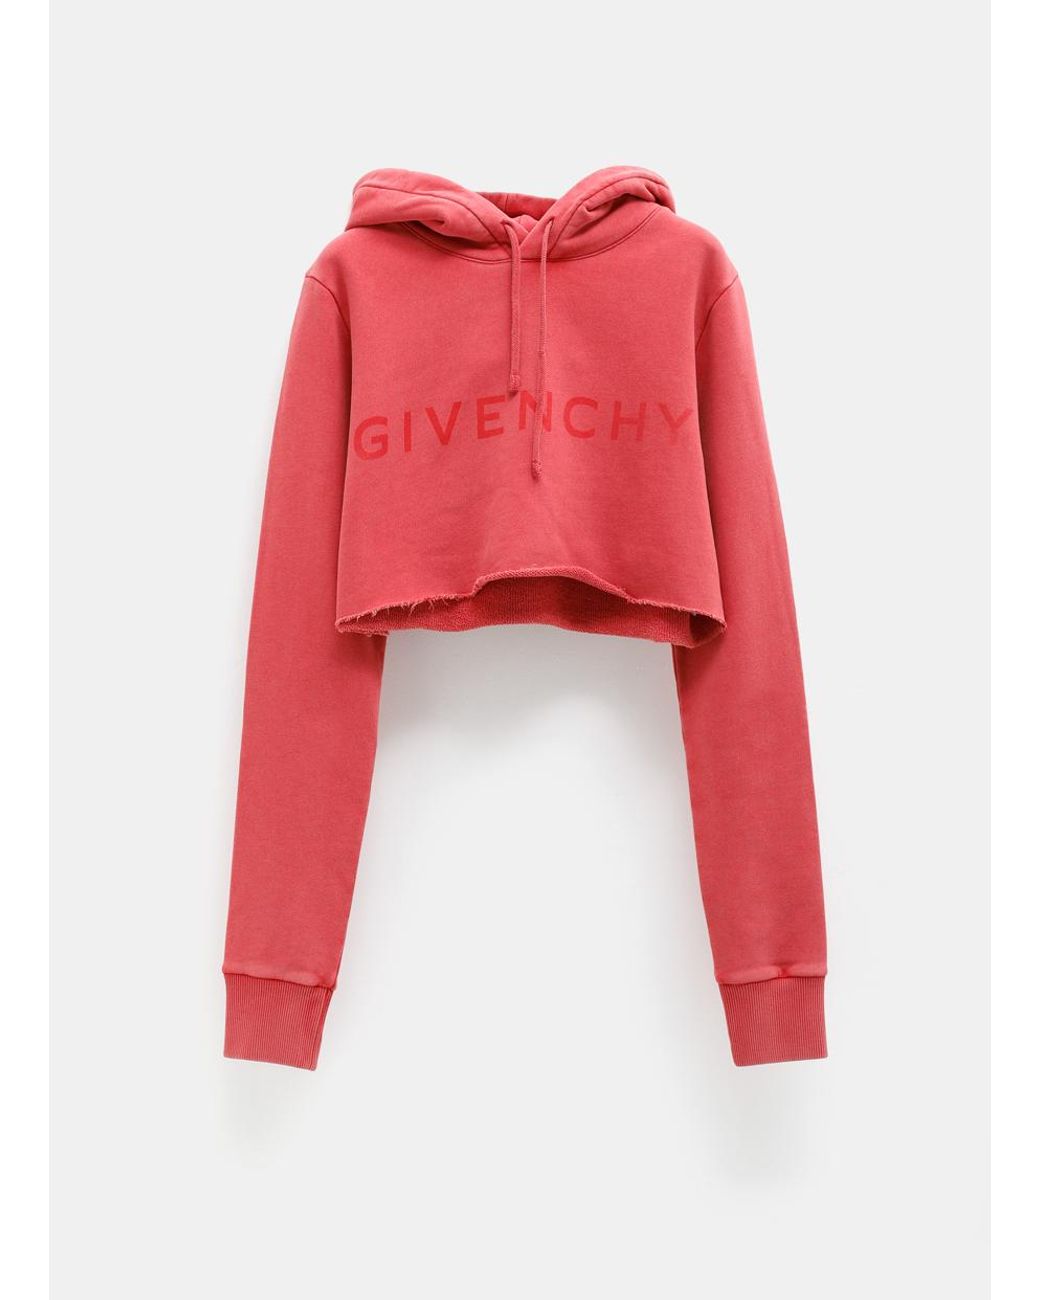 Givenchy 4g Cropped Hoodie In Fleece in Red | Lyst UK